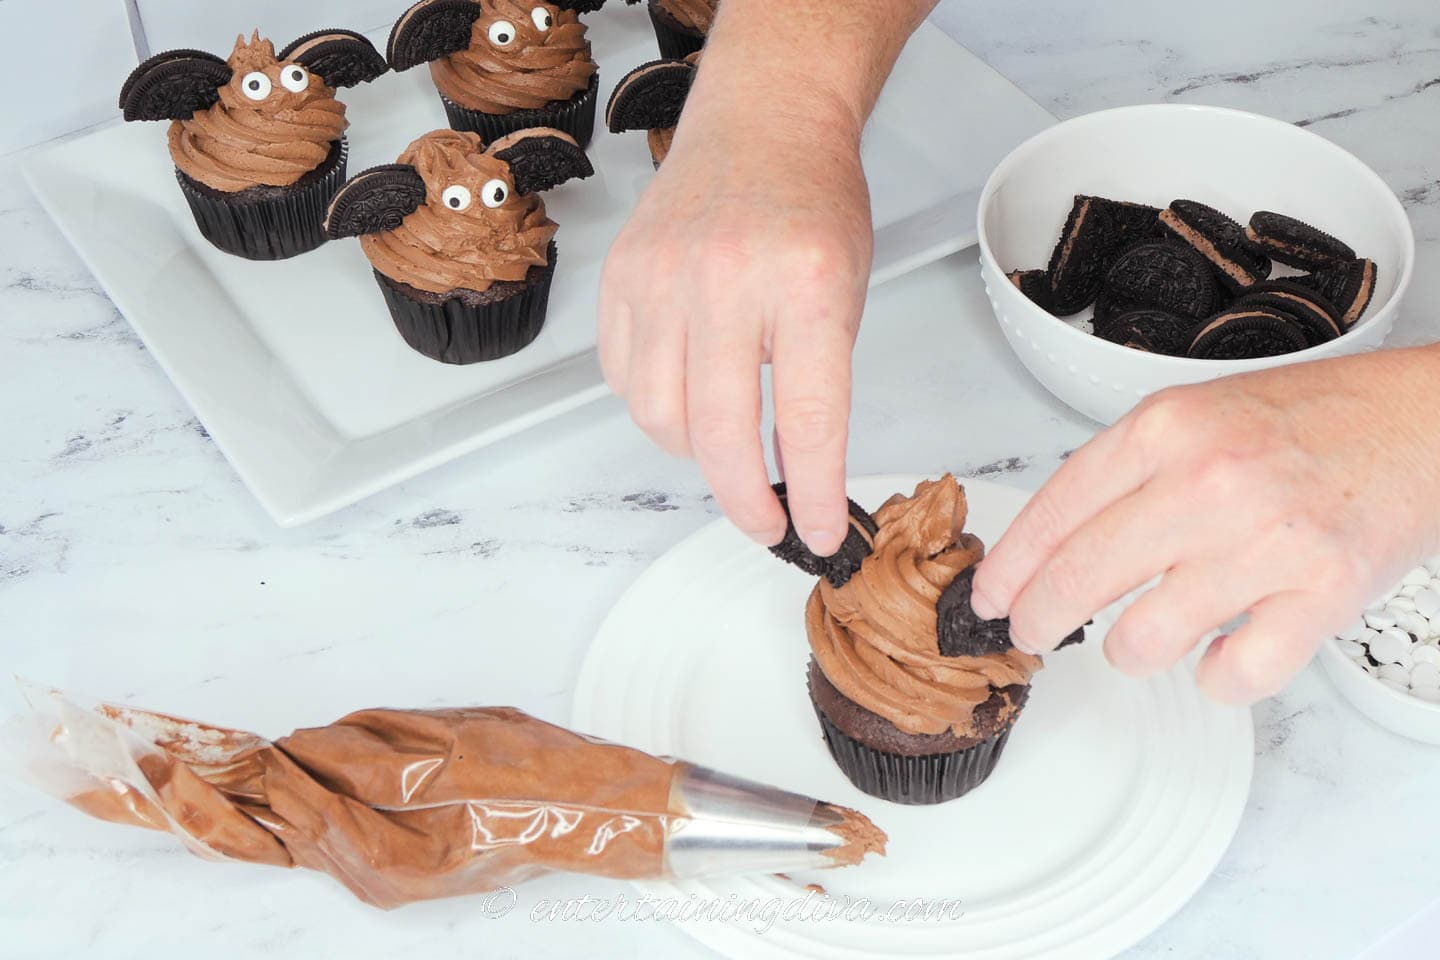 Sticking the oreo cookies into the chocolate frosting on the cupcake